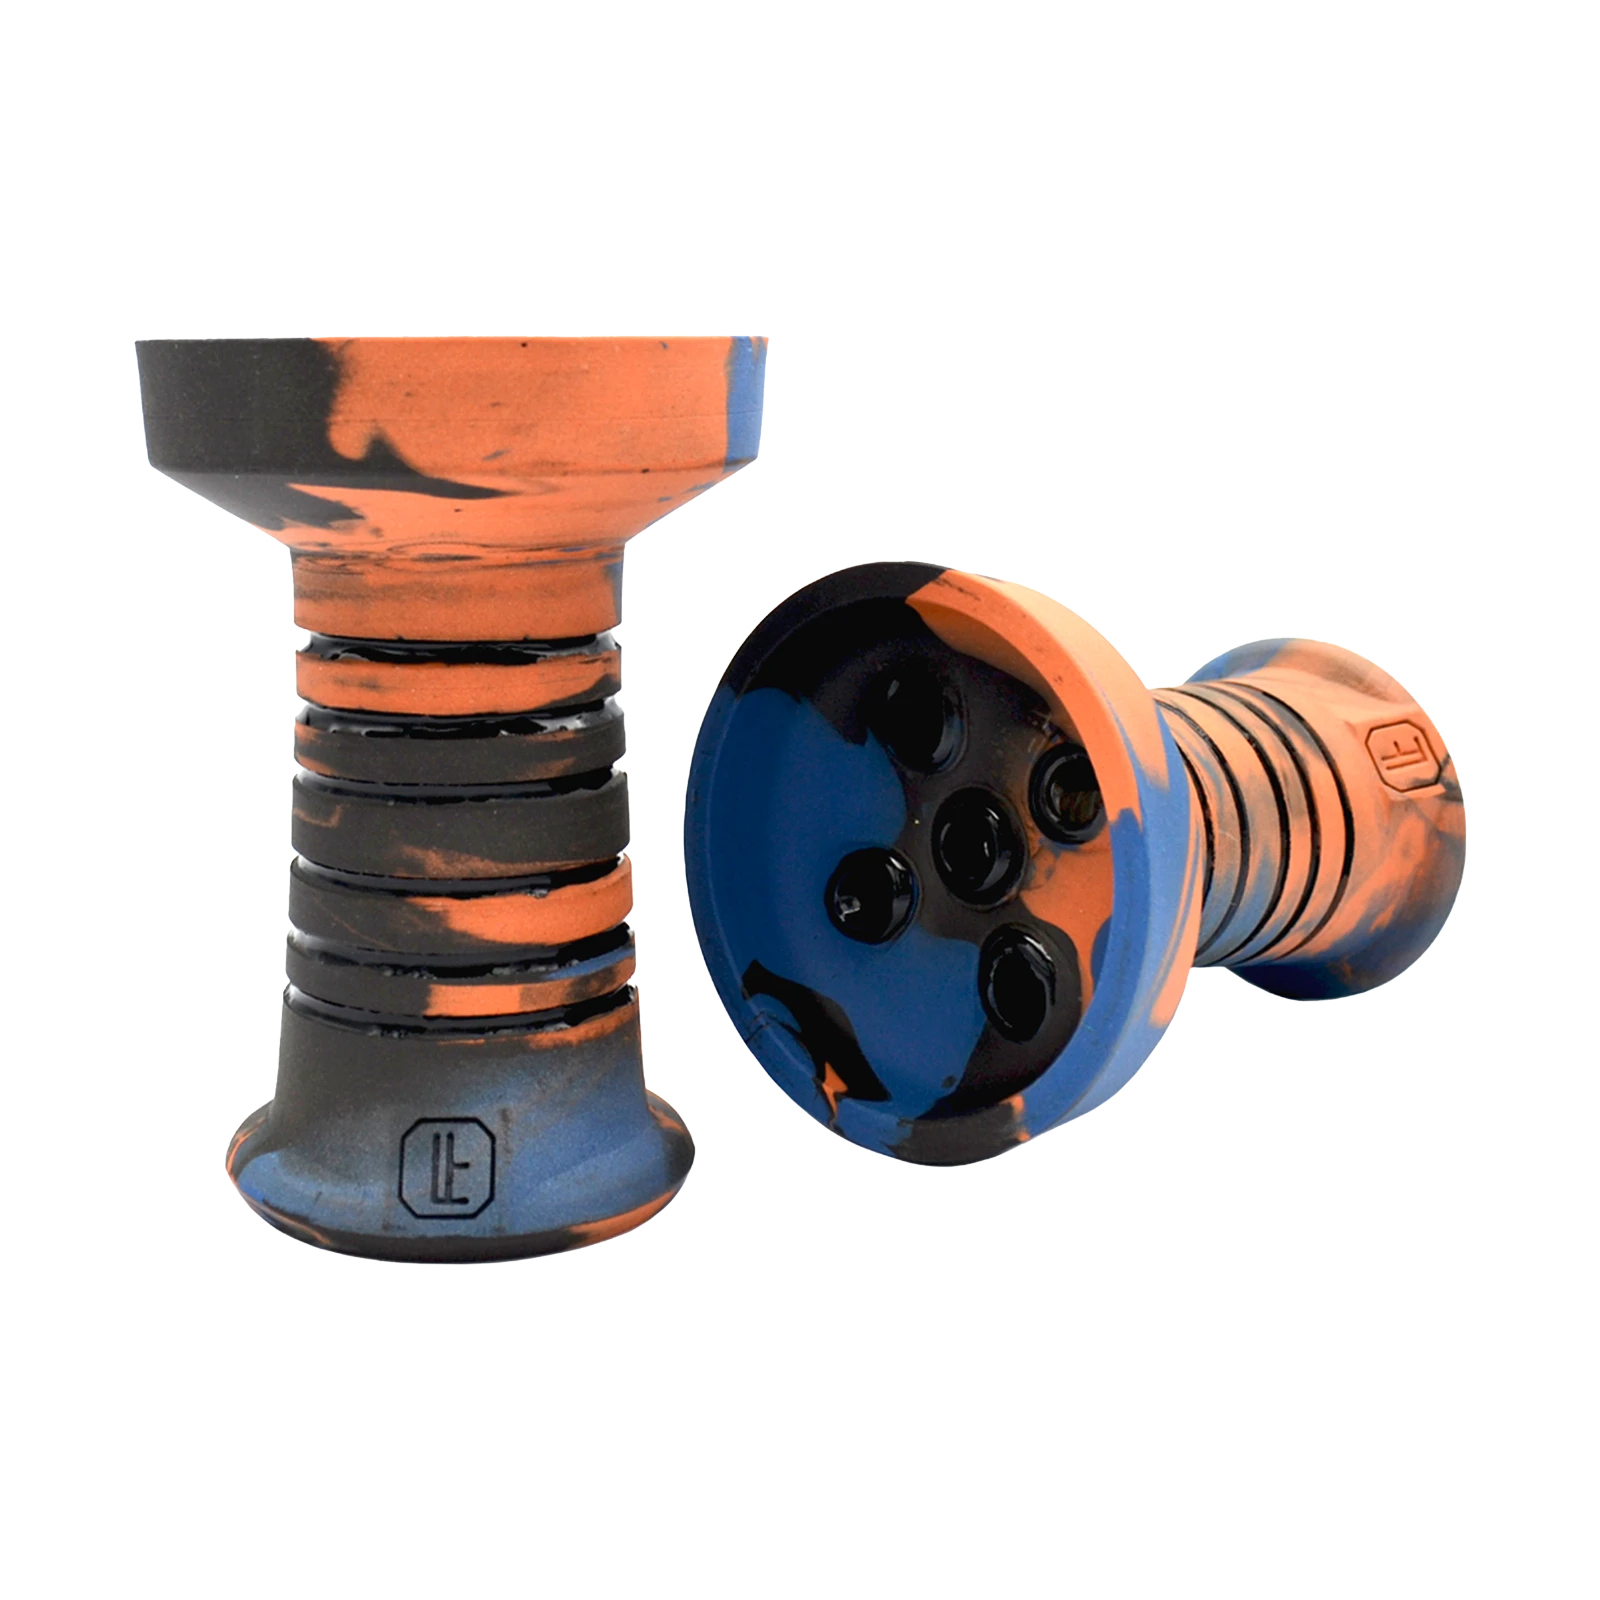 The Spectra Multi-Hole Head "Oranight" is available as a stylish accessory for your Shisha at the Hookain Online Shop! This head, in the beautiful colors blue, orange 1